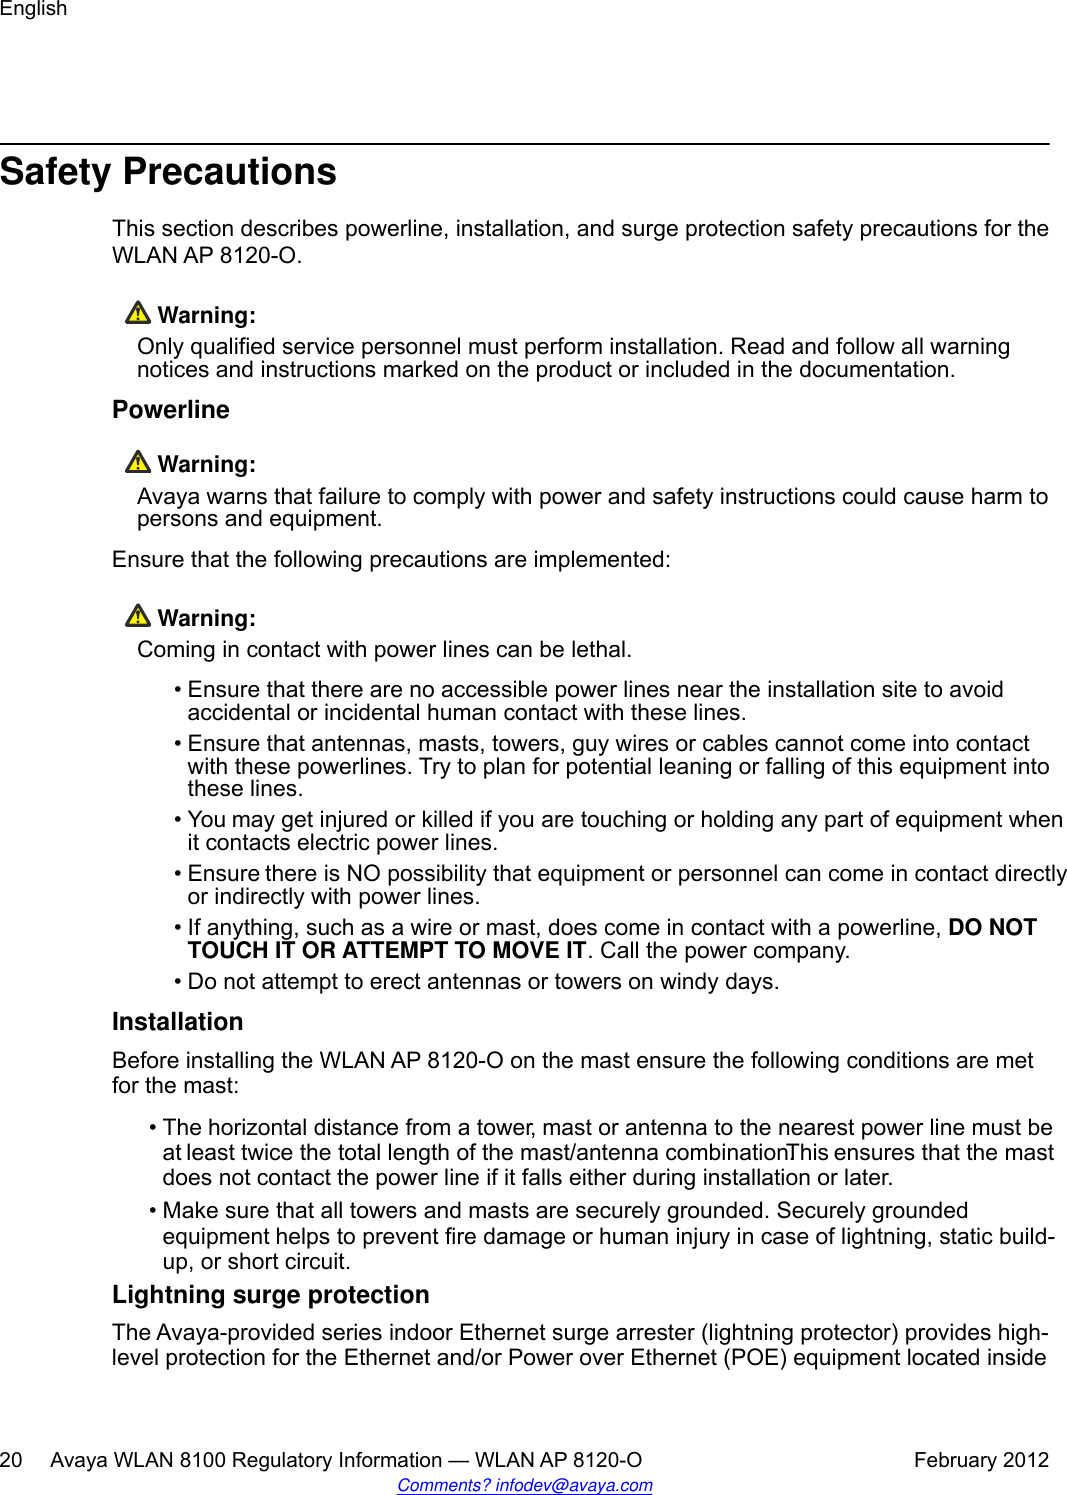 Safety PrecautionsThis section describes powerline, installation, and surge protection safety precautions for theWLAN AP 8120-O. Warning:Only qualified service personnel must perform installation. Read and follow all warningnotices and instructions marked on the product or included in the documentation.Powerline Warning:Avaya warns that failure to comply with power and safety instructions could cause harm topersons and equipment.Ensure that the following precautions are implemented: Warning:Coming in contact with power lines can be lethal.• Ensure that there are no accessible power lines near the installation site to avoidaccidental or incidental human contact with these lines.• Ensure that antennas, masts, towers, guy wires or cables cannot come into contactwith these powerlines. Try to plan for potential leaning or falling of this equipment intothese lines.•You may get injured or killed if you are touching or holding any part of equipment whenit contacts electric power lines.•Ensure there is NO possibility that equipment or personnel can come in contact directlyor indirectly with power lines.• If anything, such as a wire or mast, does come in contact with a powerline, DO NOTTOUCH IT OR ATTEMPT TO MOVE IT. Call the power company.• Do not attempt to erect antennas or towers on windy days.InstallationBefore installing the WLAN AP 8120-O on the mast ensure the following conditions are metfor the mast:•The horizontal distance from a tower, mast or antenna to the nearest power line must beat least twice the total length of the mast/antenna combination. This ensures that the mastdoes not contact the power line if it falls either during installation or later.• Make sure that all towers and masts are securely grounded. Securely groundedequipment helps to prevent fire damage or human injury in case of lightning, static build-up, or short circuit.Lightning surge protectionThe Avaya-provided series indoor Ethernet surge arrester (lightning protector) provides high-level protection for the Ethernet and/or Power over Ethernet (POE) equipment located insideEnglish20     Avaya WLAN 8100 Regulatory Information — WLAN AP 8120-O February 2012Comments? infodev@avaya.com